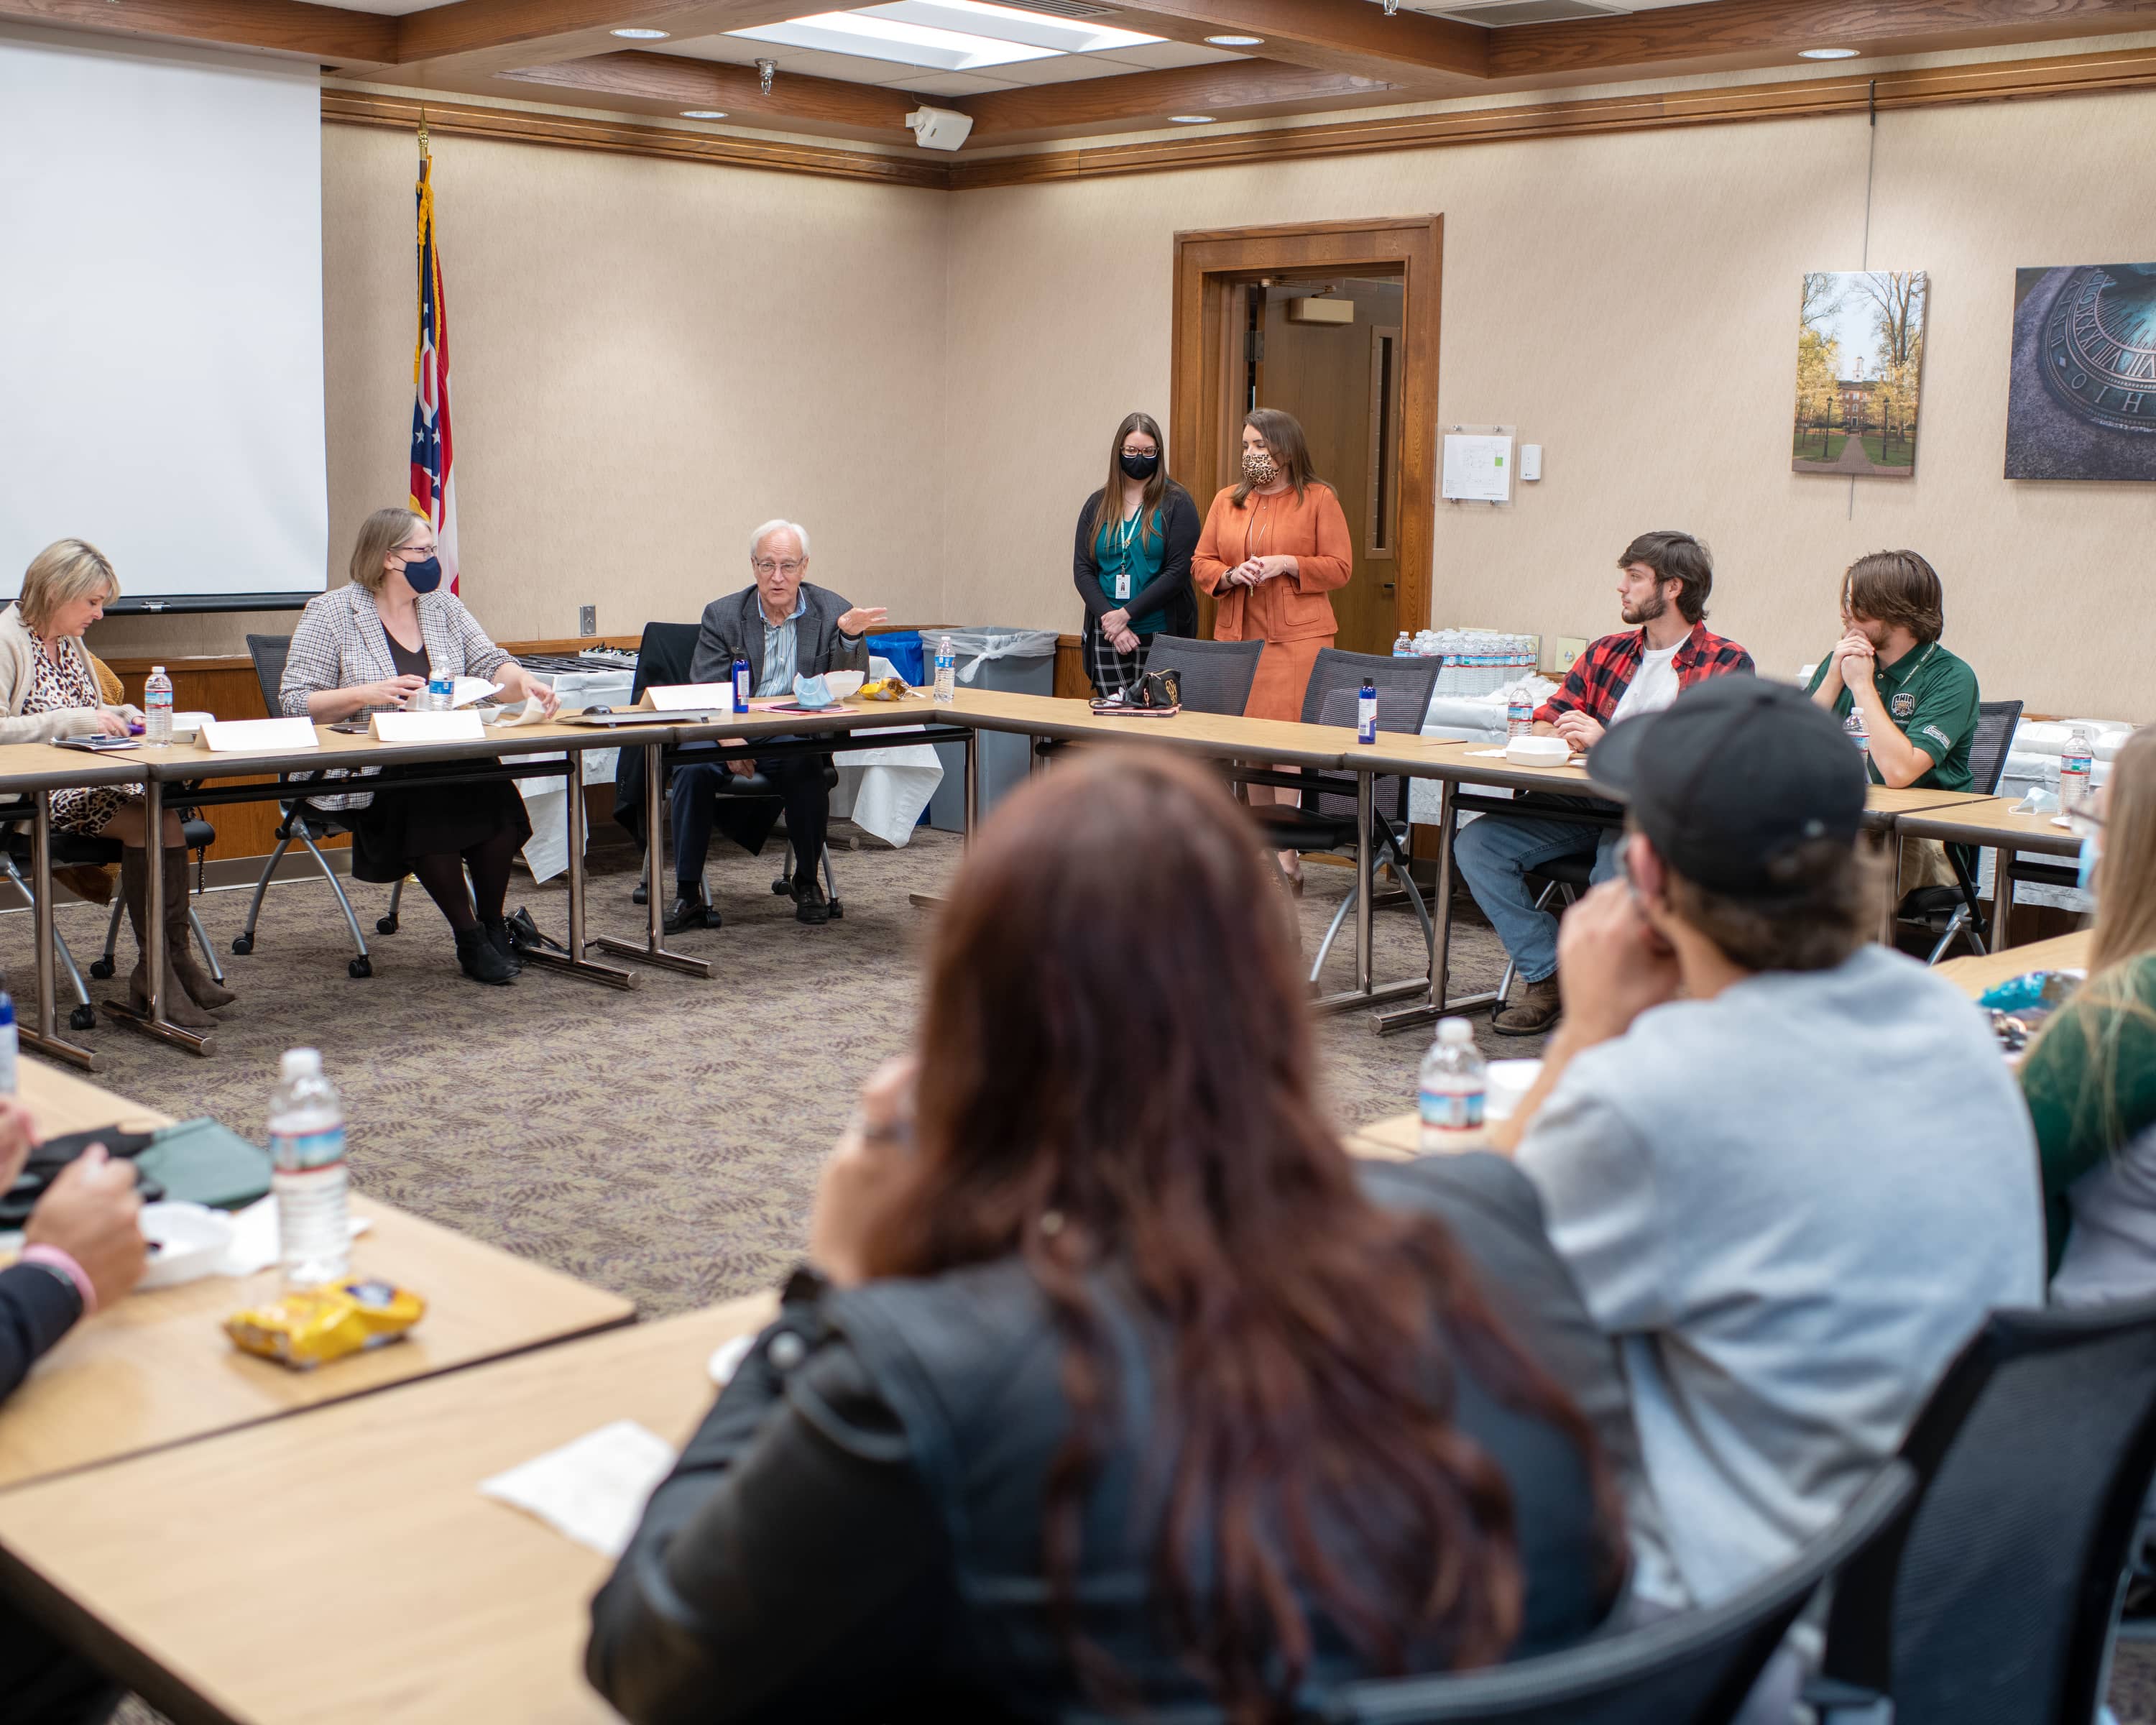 Students had the opportunity to share a lunch and question and answer session with Pres. Sherman, Provost Sayrs and the leadership team at OHIO Southern.